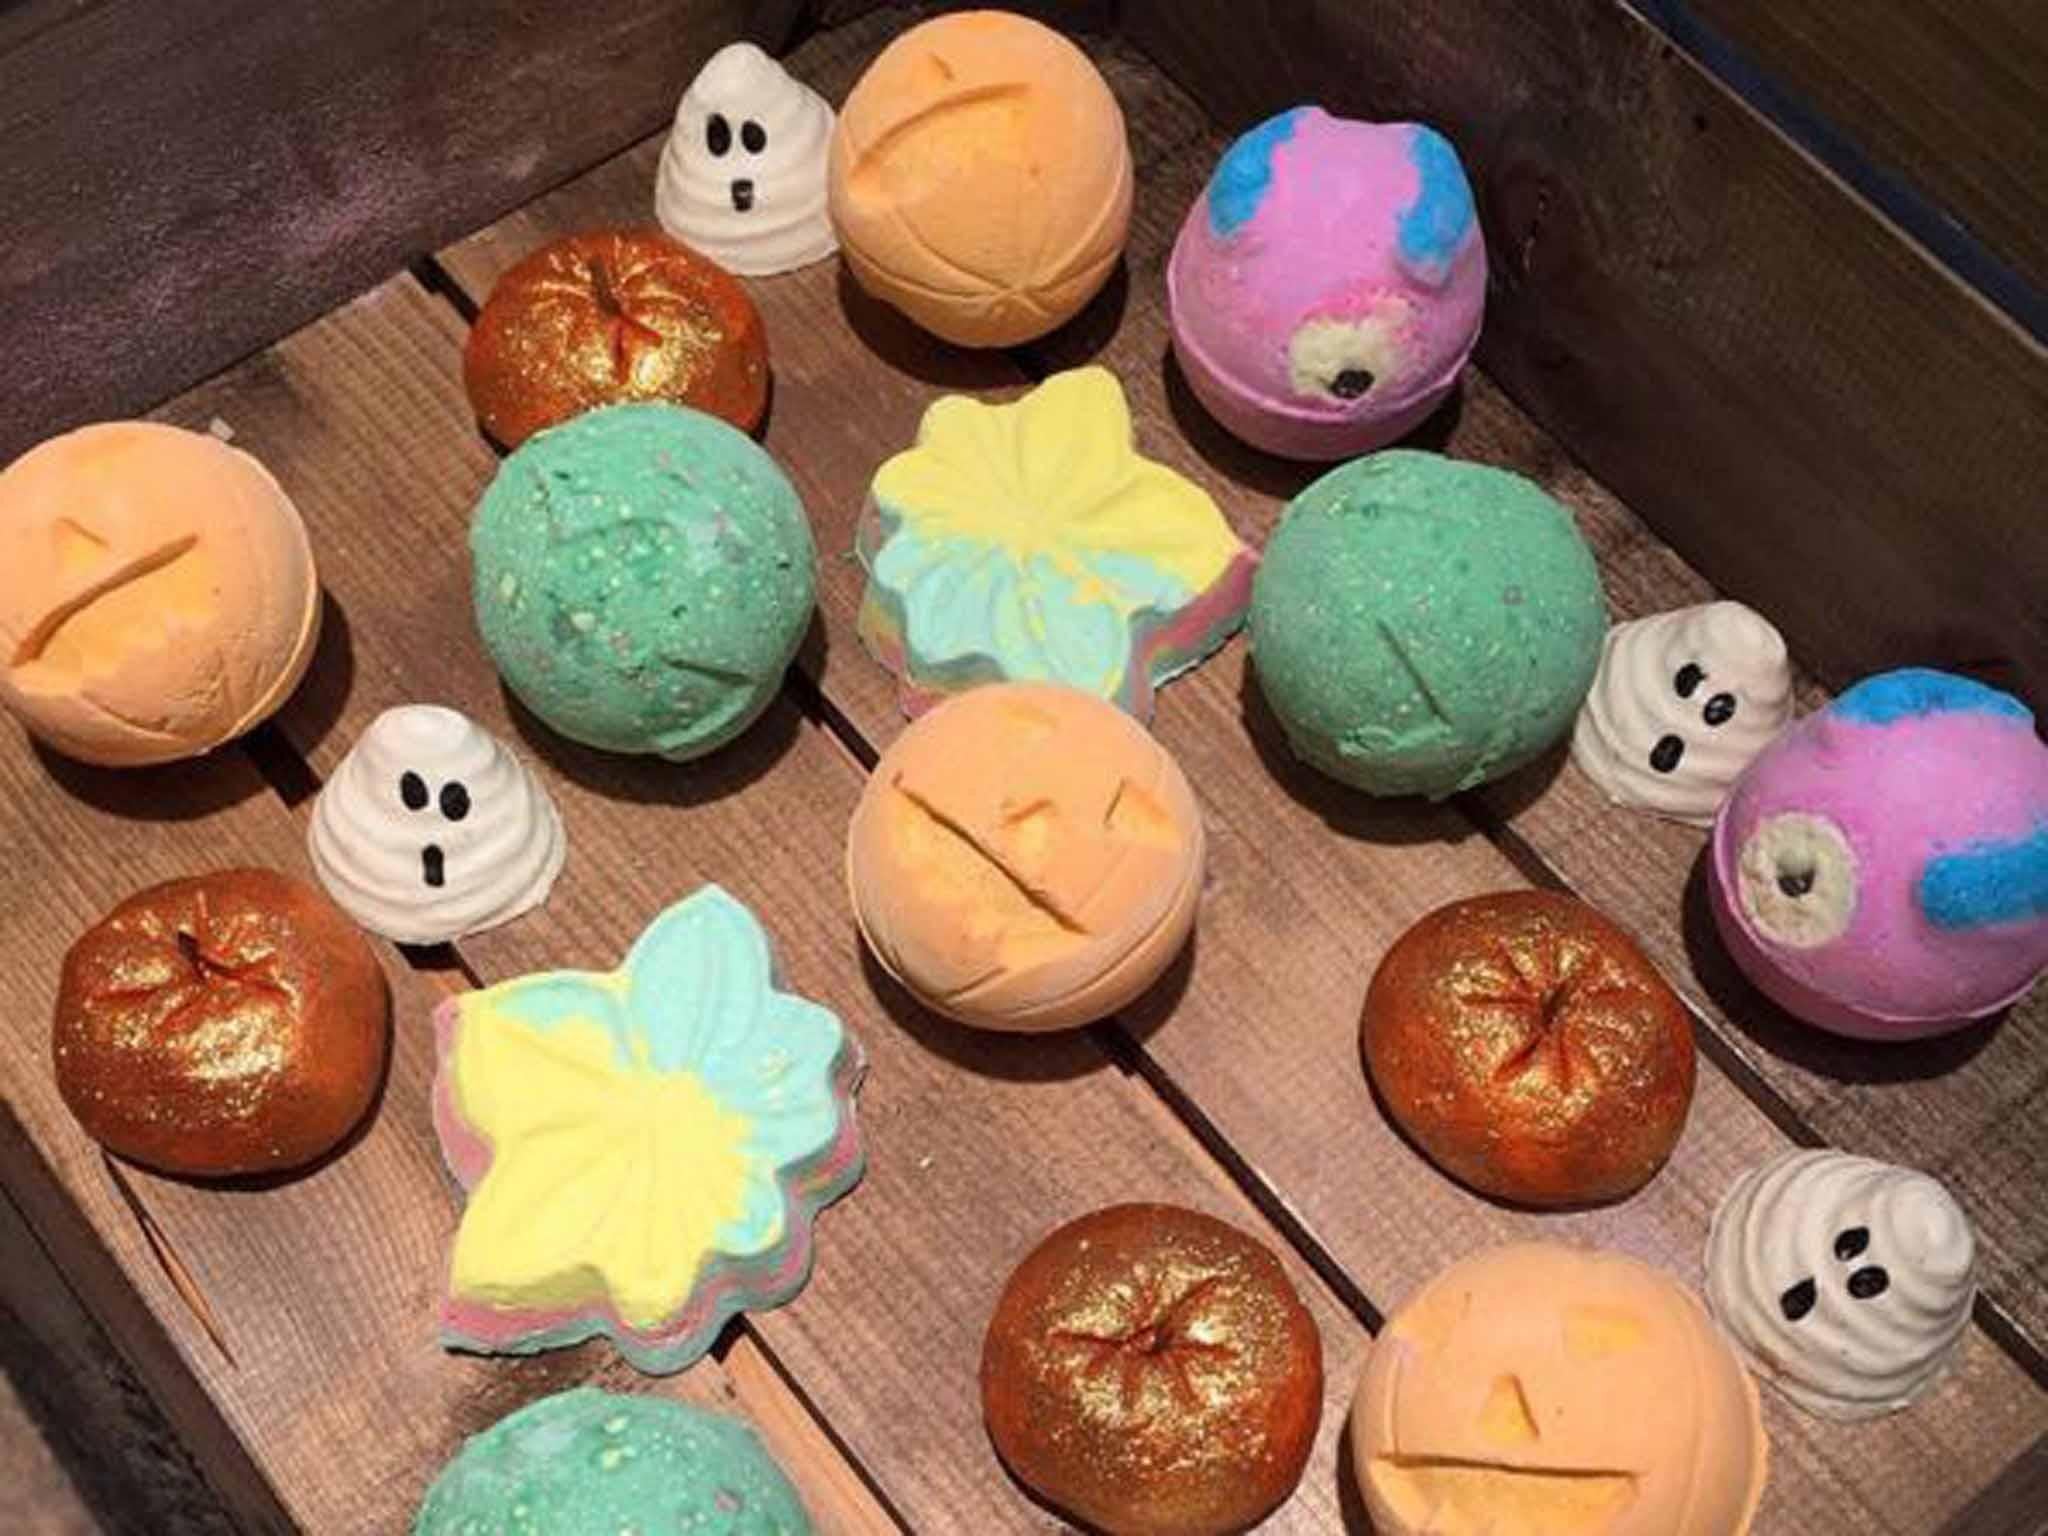 Those ghostly meringue soakers look good enough to eat